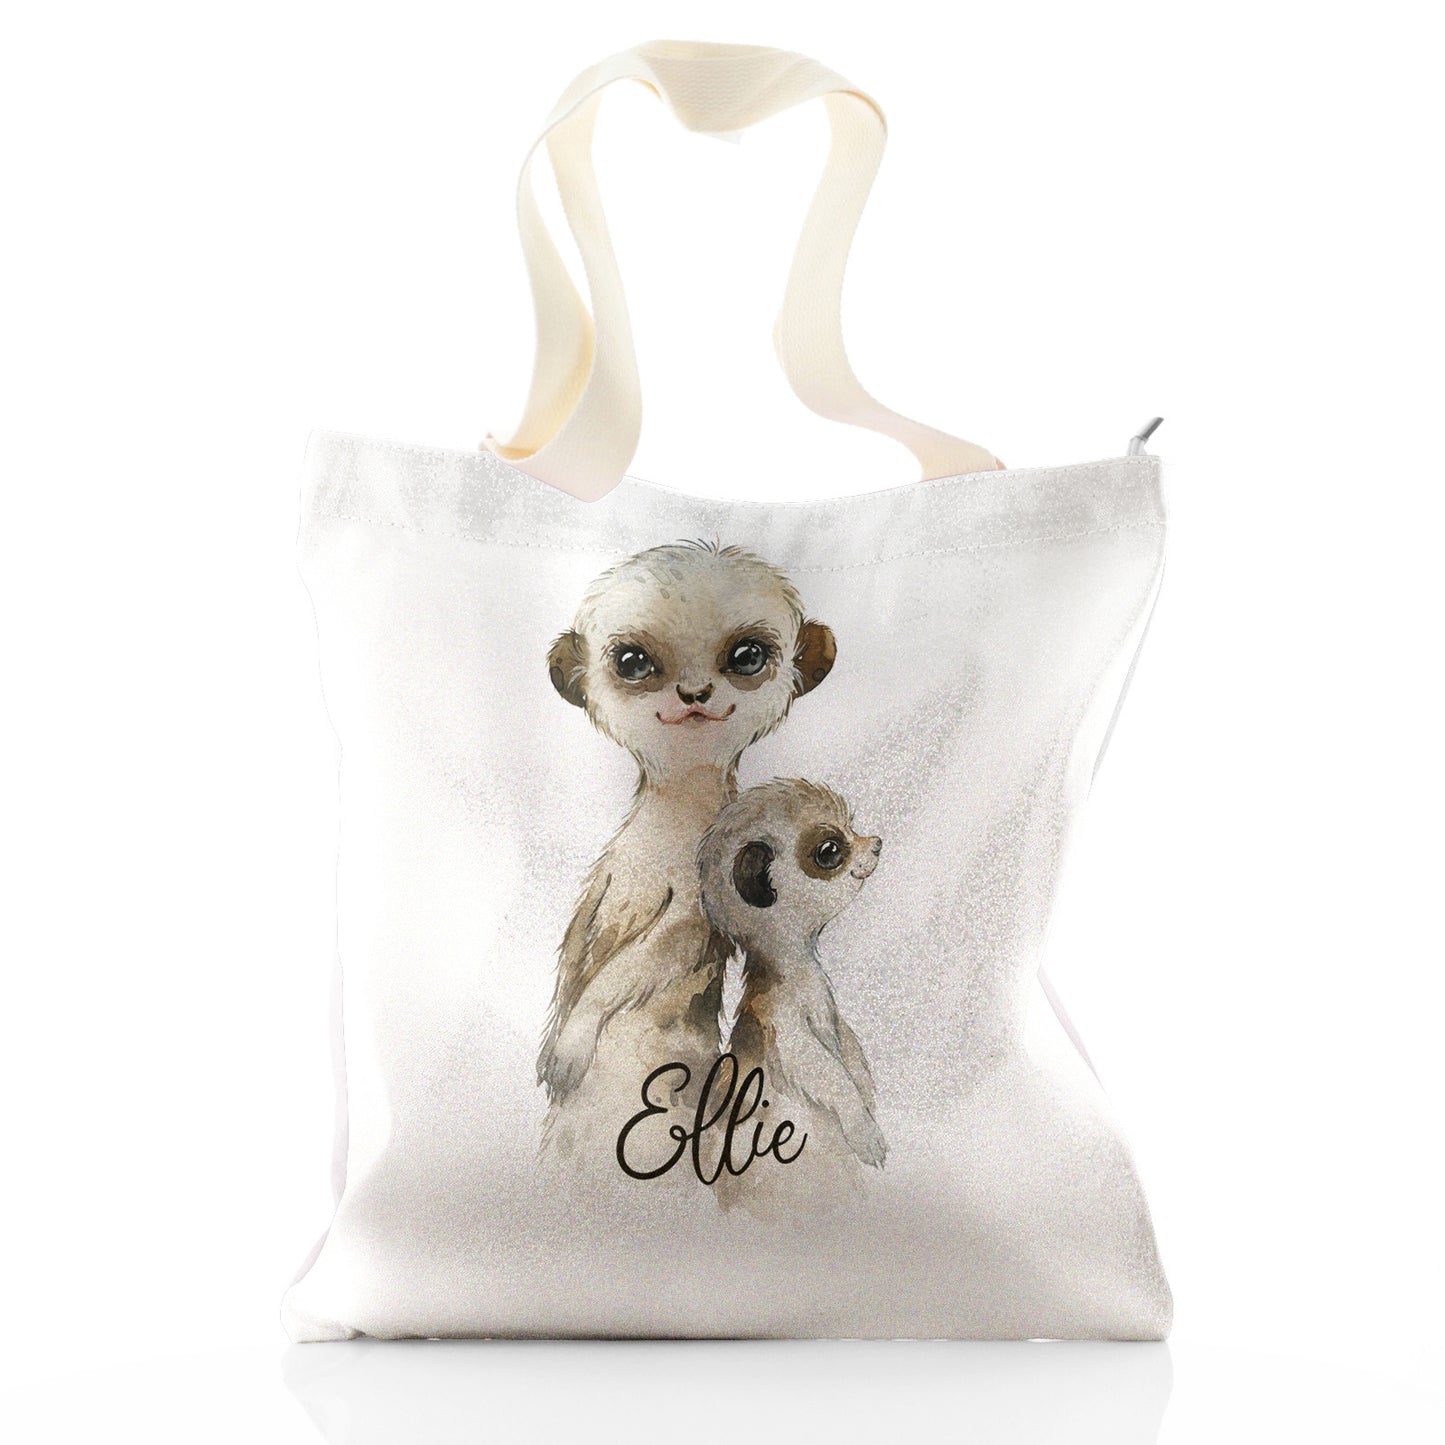 Personalised Glitter Tote Bag with Meerkat Baby and Adult and Cute Text